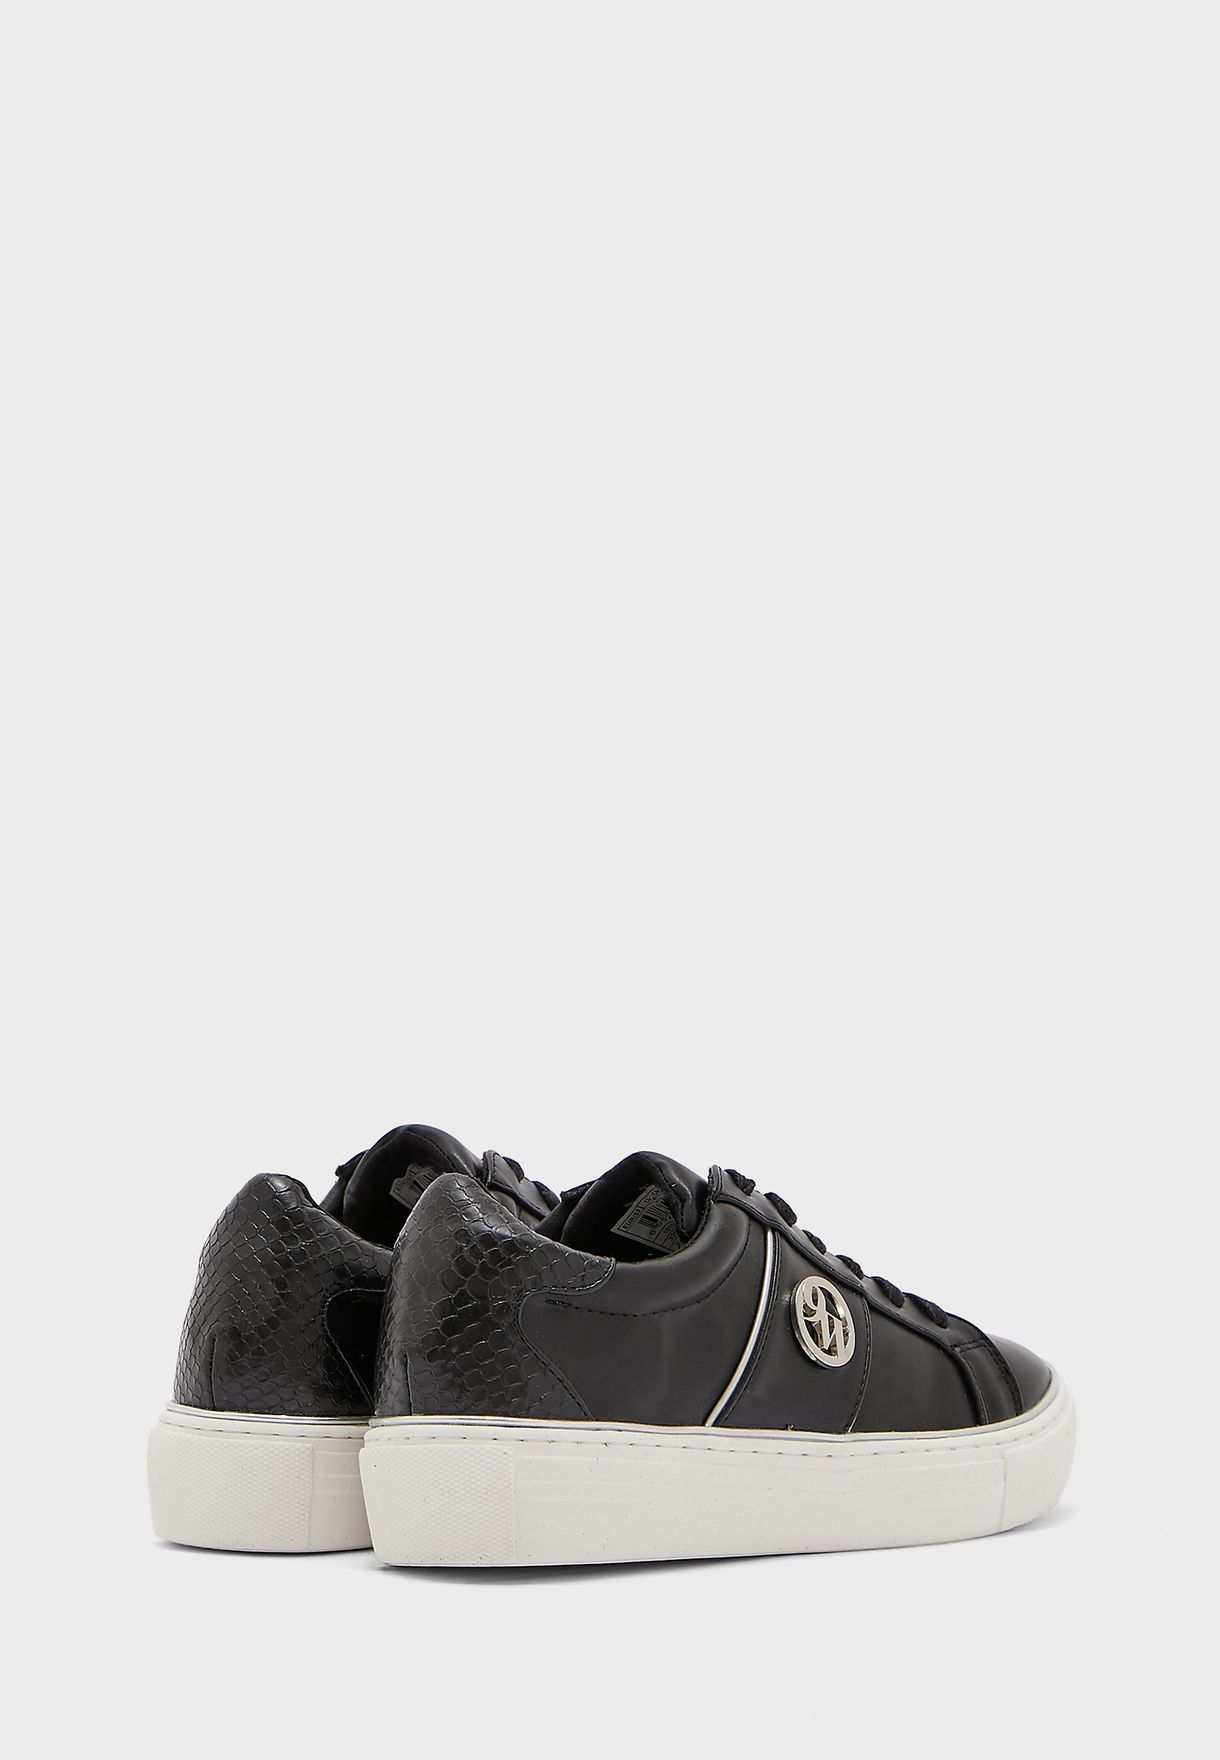 Paterson Folw   Low-Top Sneakers